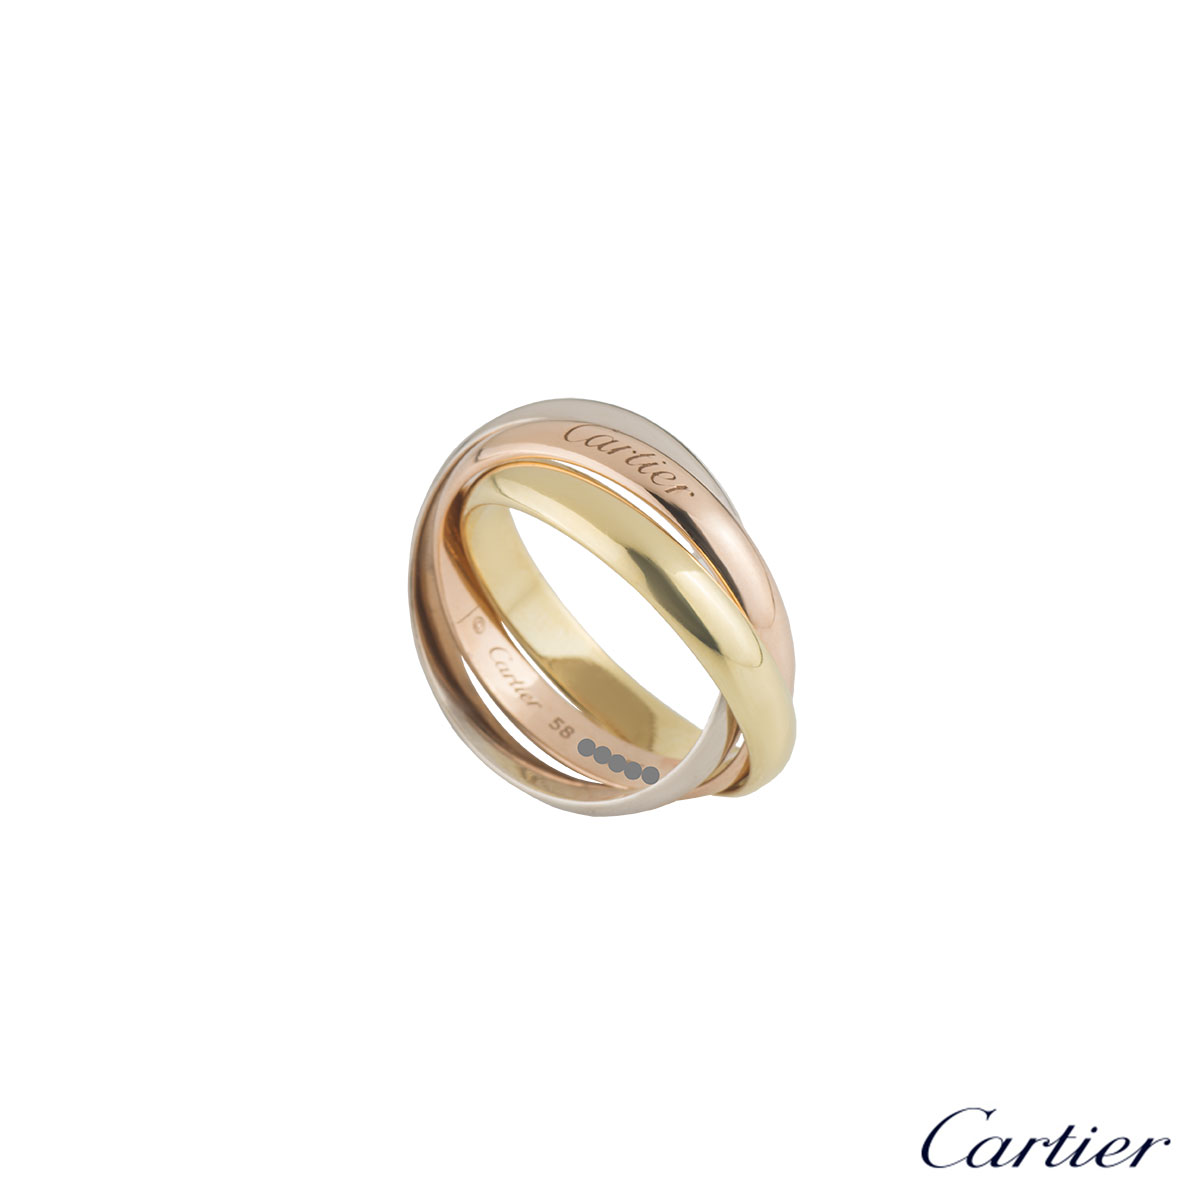 cartier trinity ring dimensions